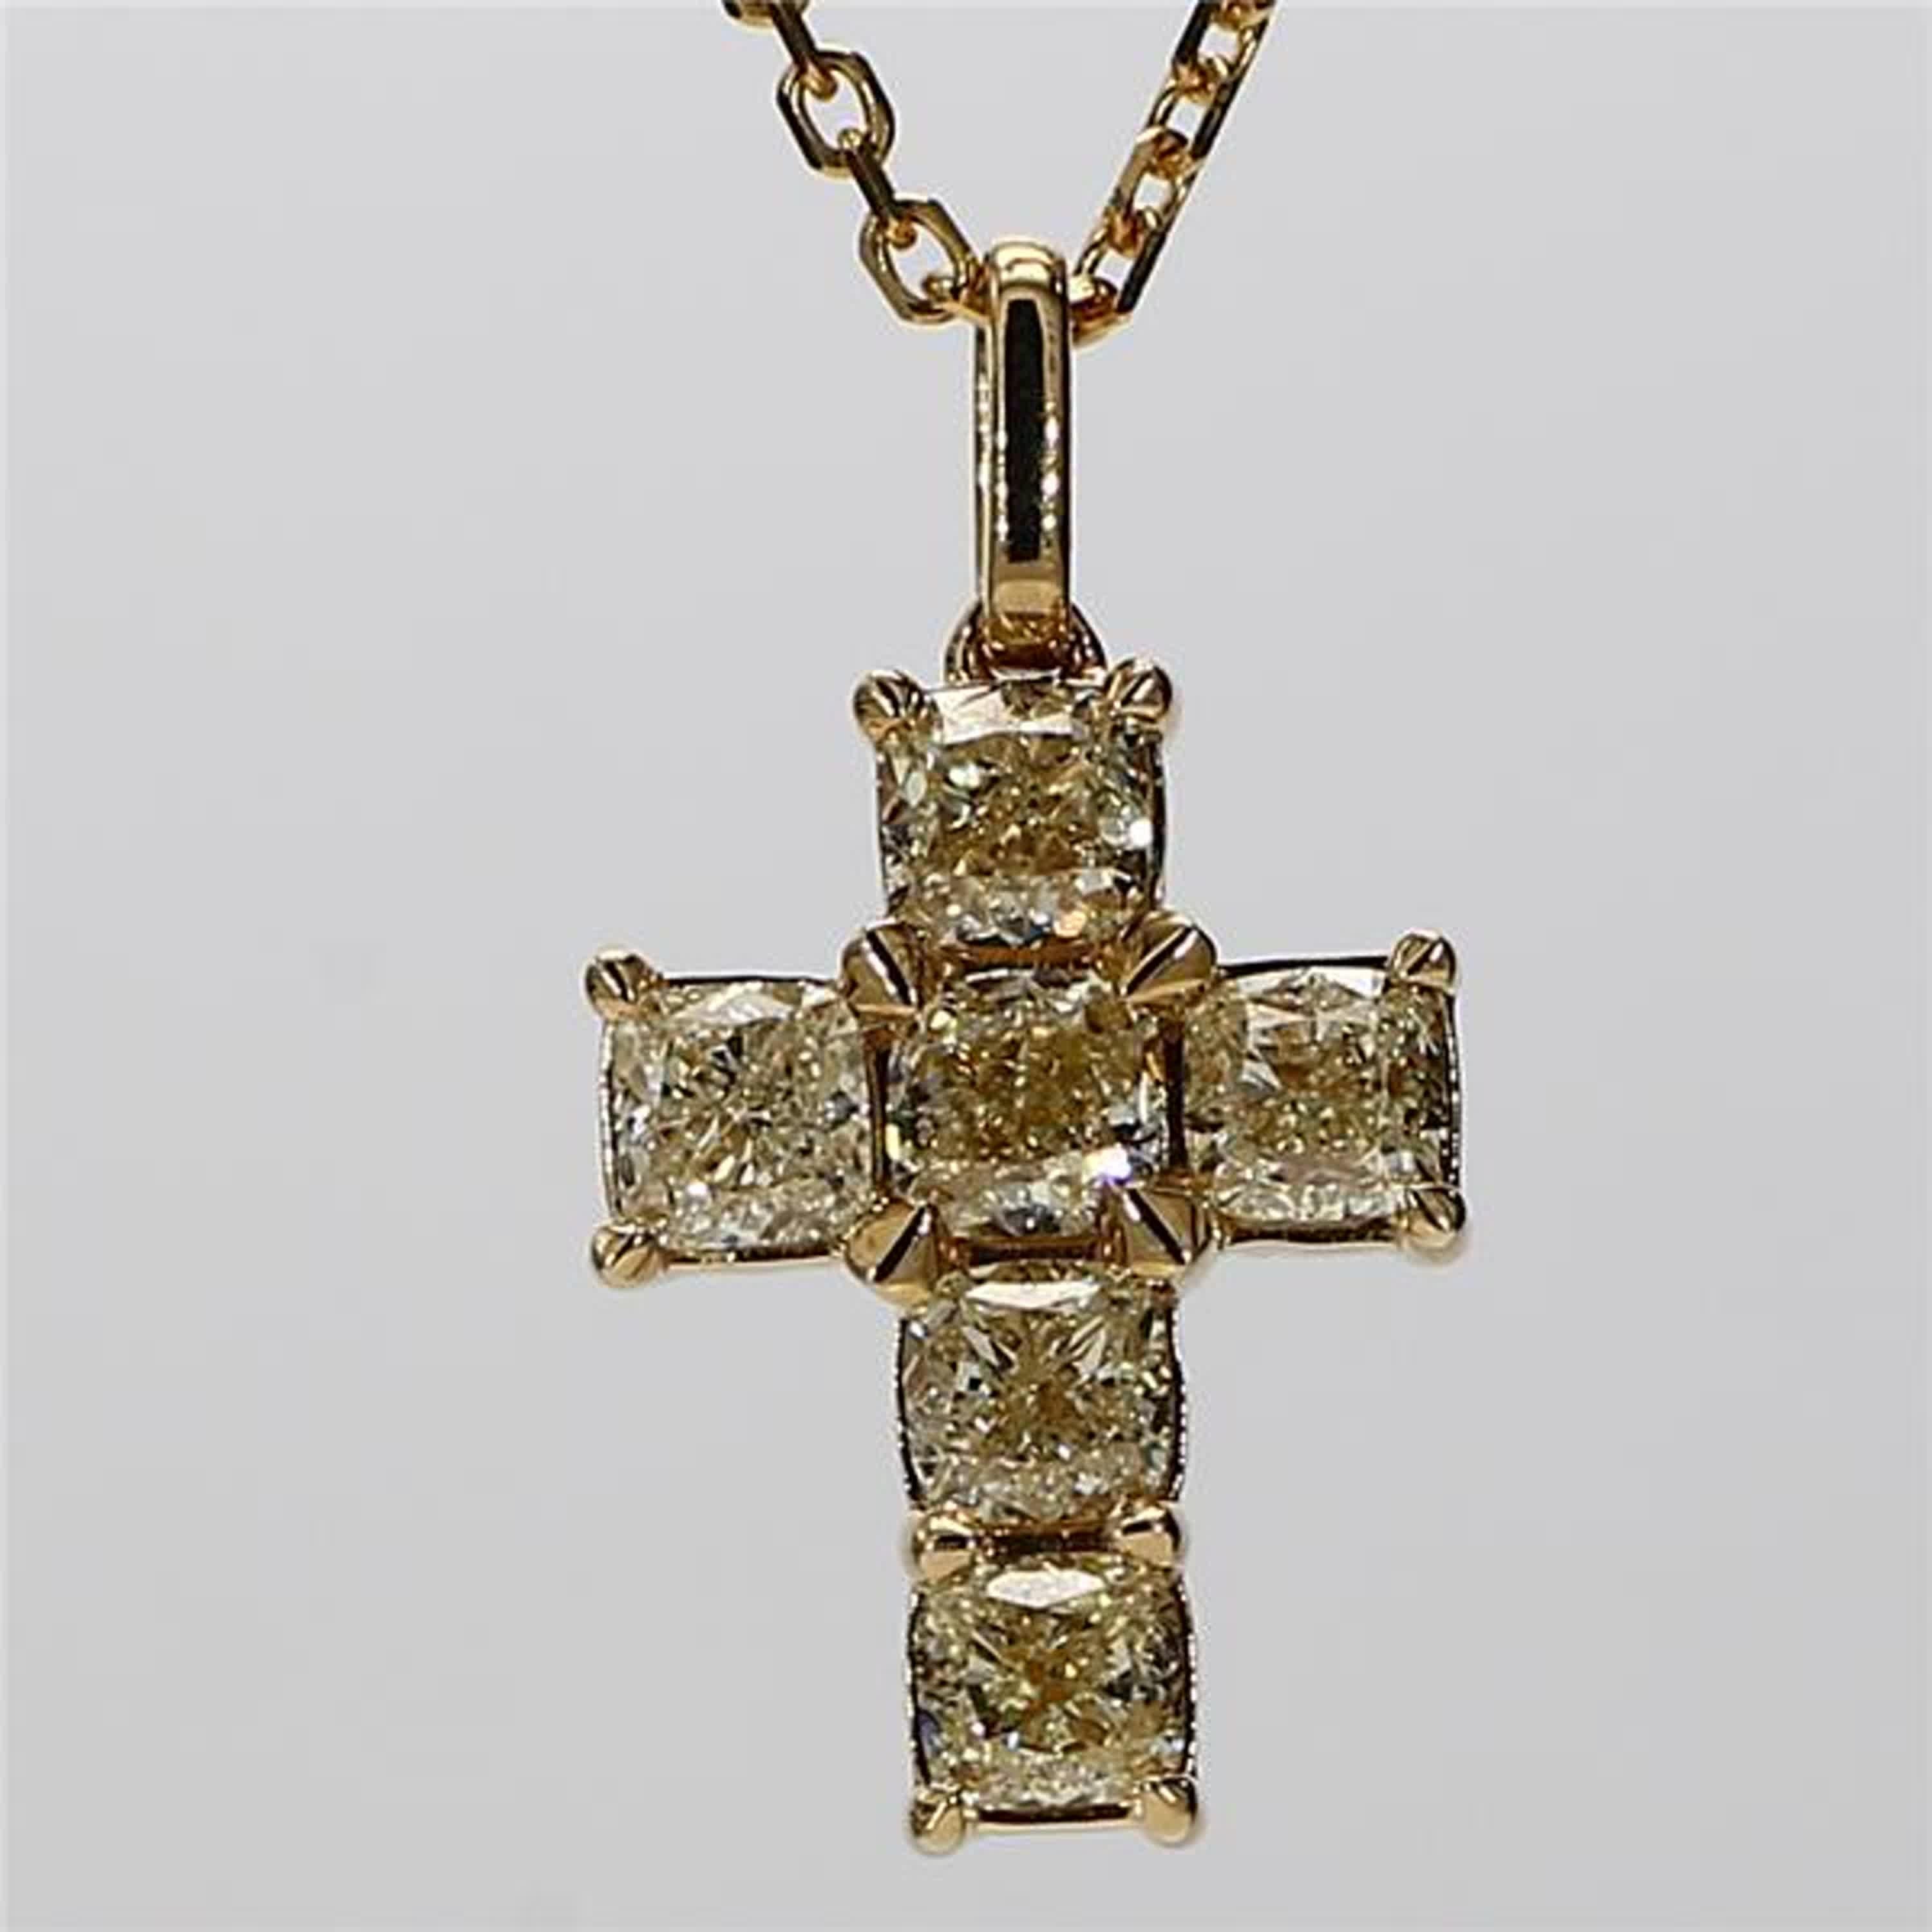 RareGemWorld's classic diamond pendant. Mounted in a beautiful 18K Yellow Gold setting with natural cushion cut yellow diamonds in a beautiful cross format. This pendant is guaranteed to impress and enhance your personal collection!

Total Weight: